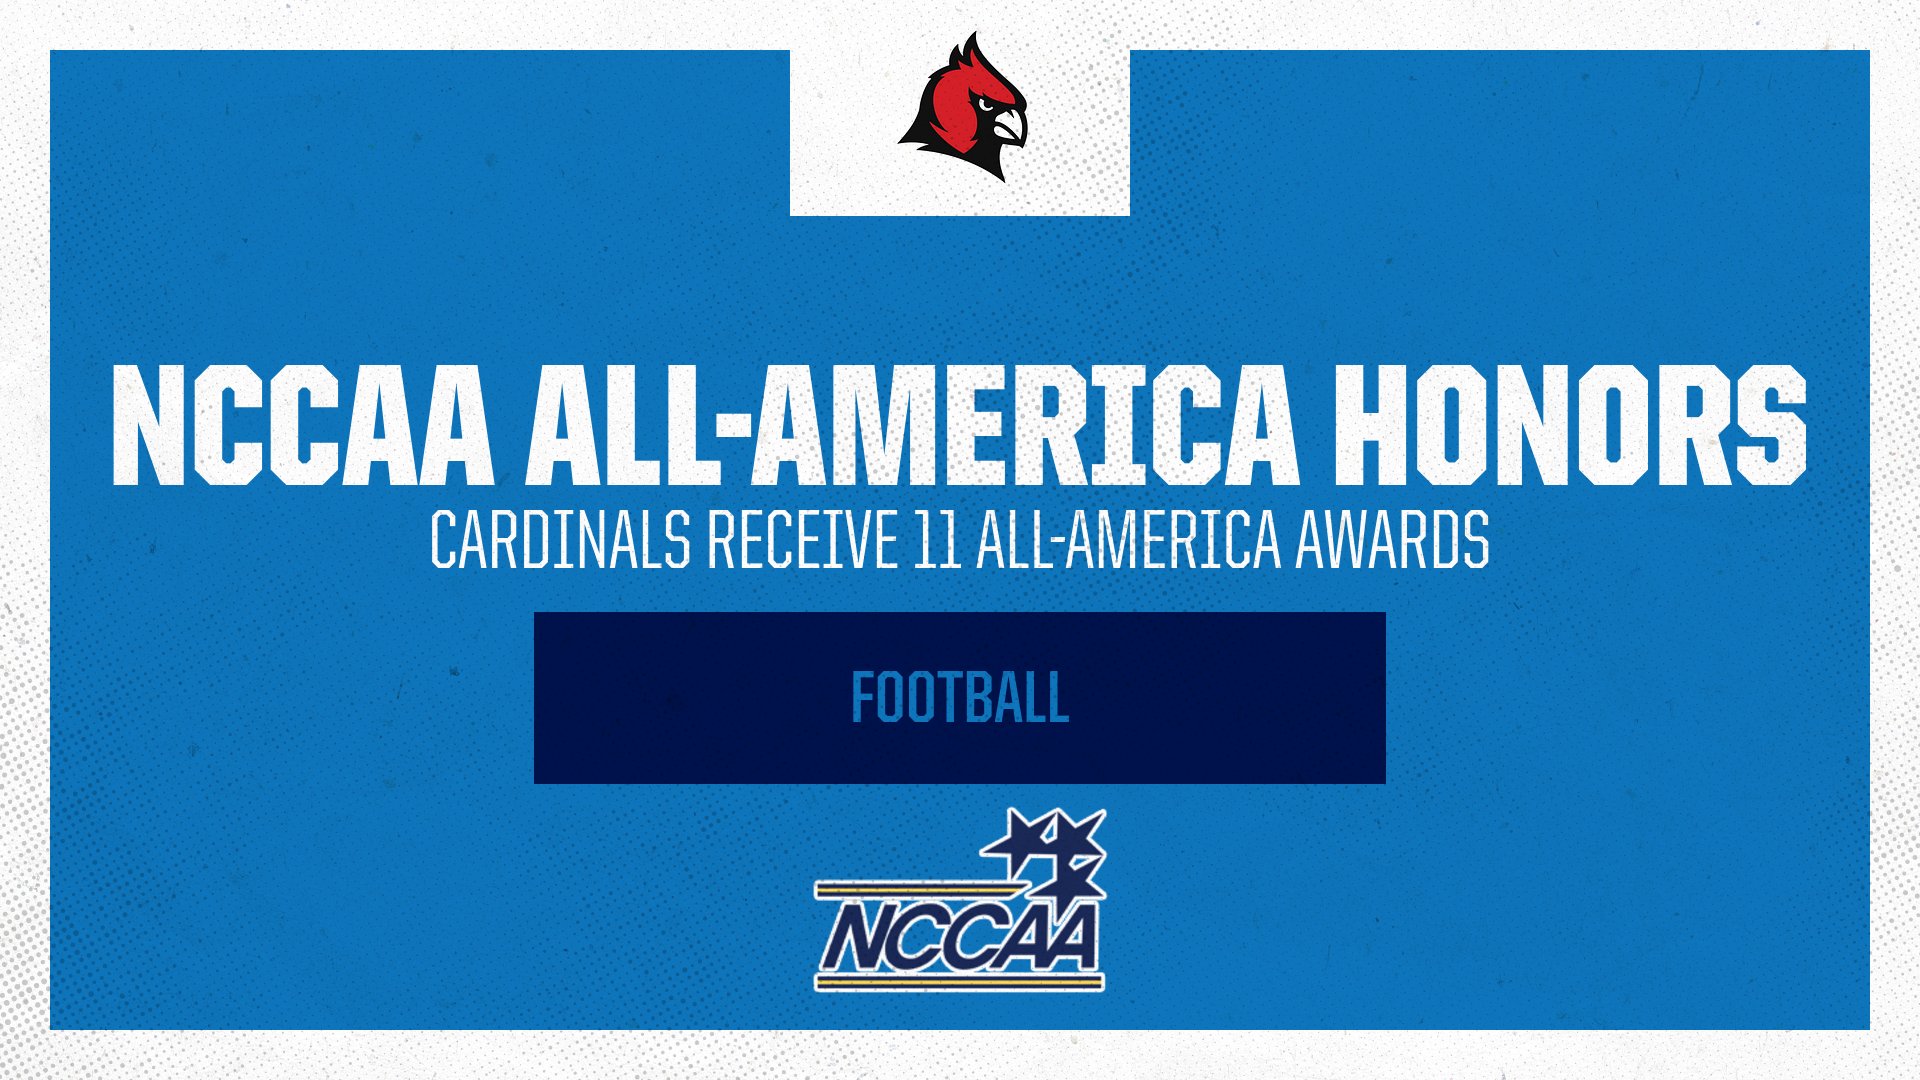 Football receives 11 All-America Awards from the NCCAA